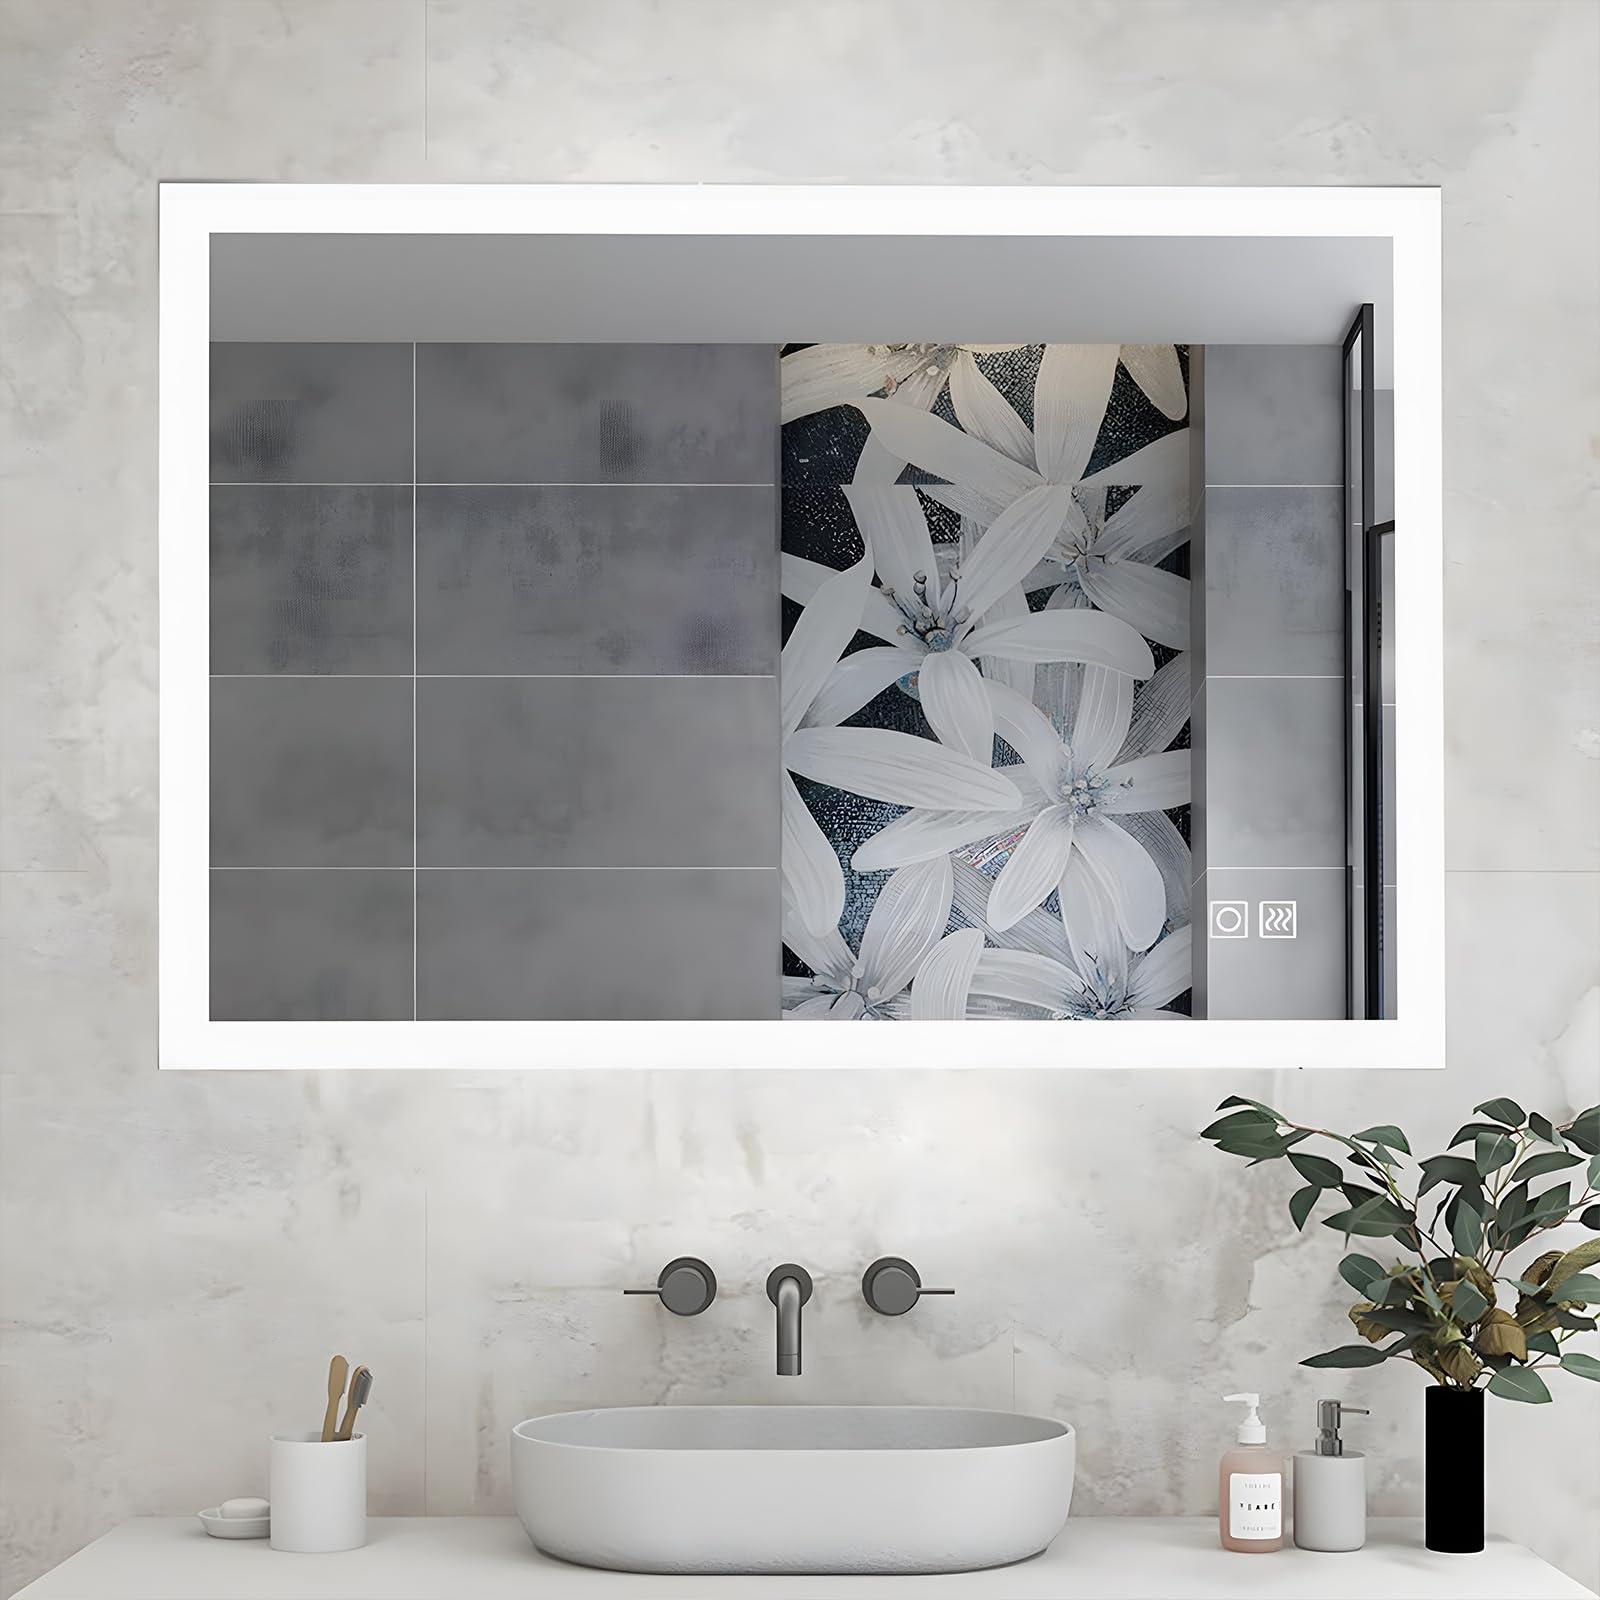 MIQU Bathroom Mirror 600 x 500 mm with LED Light, Rectangular Large Illuminated Wall Mounted Makeup Mirror with 3 Colors Light & Anti-Fog for Bath,Bedroom,Hallway,Living Room 0